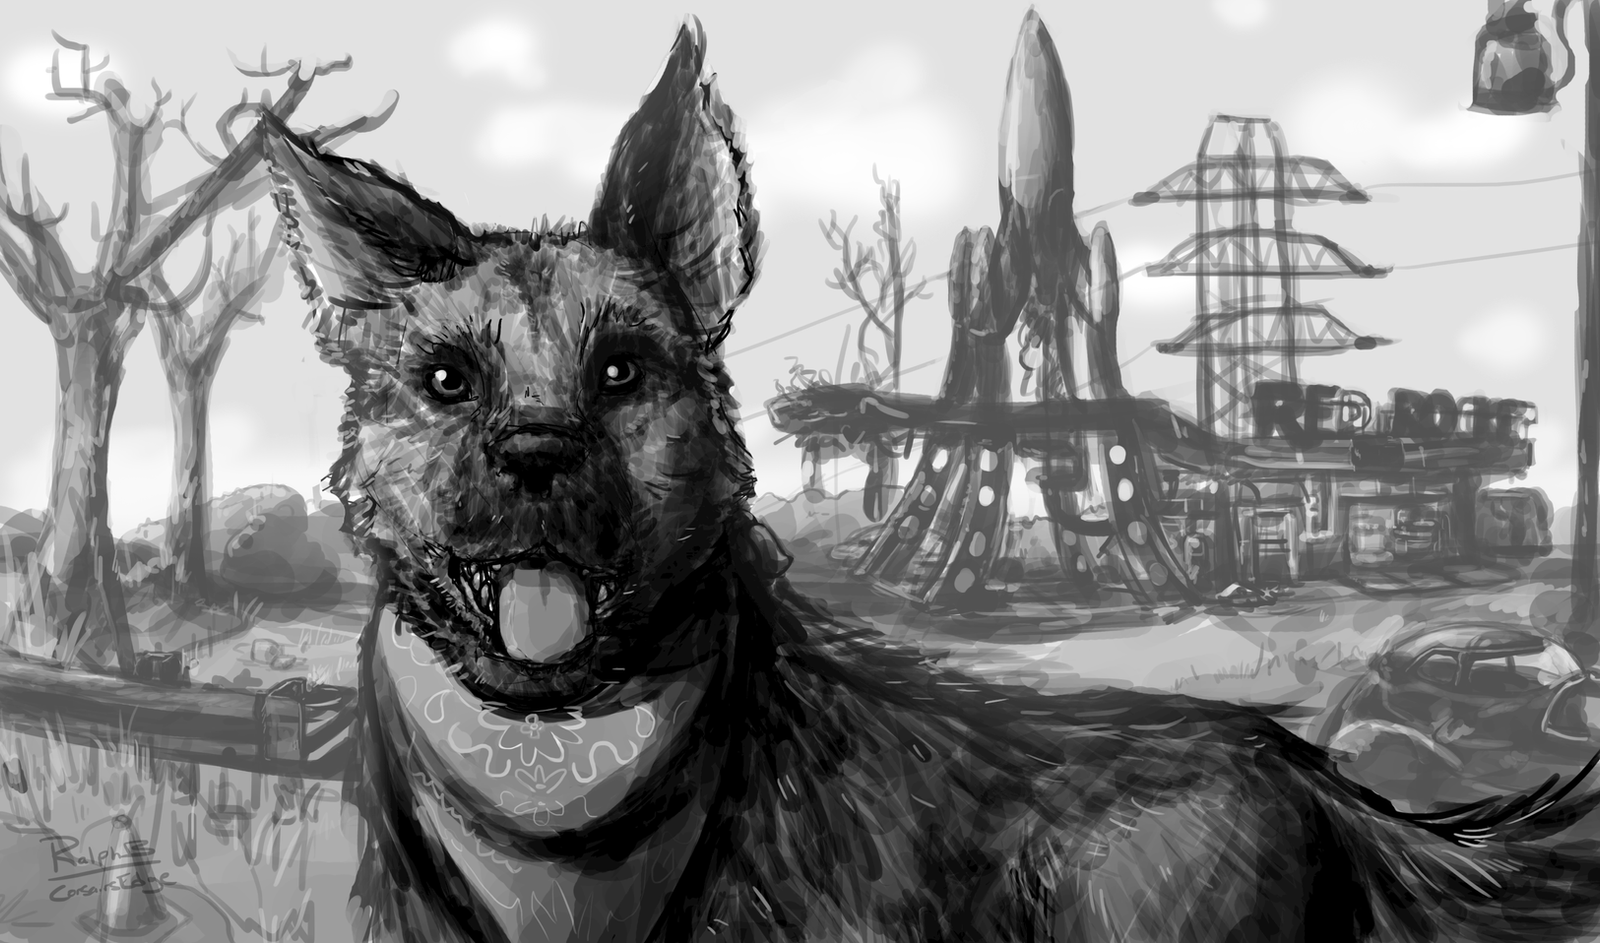 Dogmeat (Fallout 4) by CorsairsEdge on DeviantArt